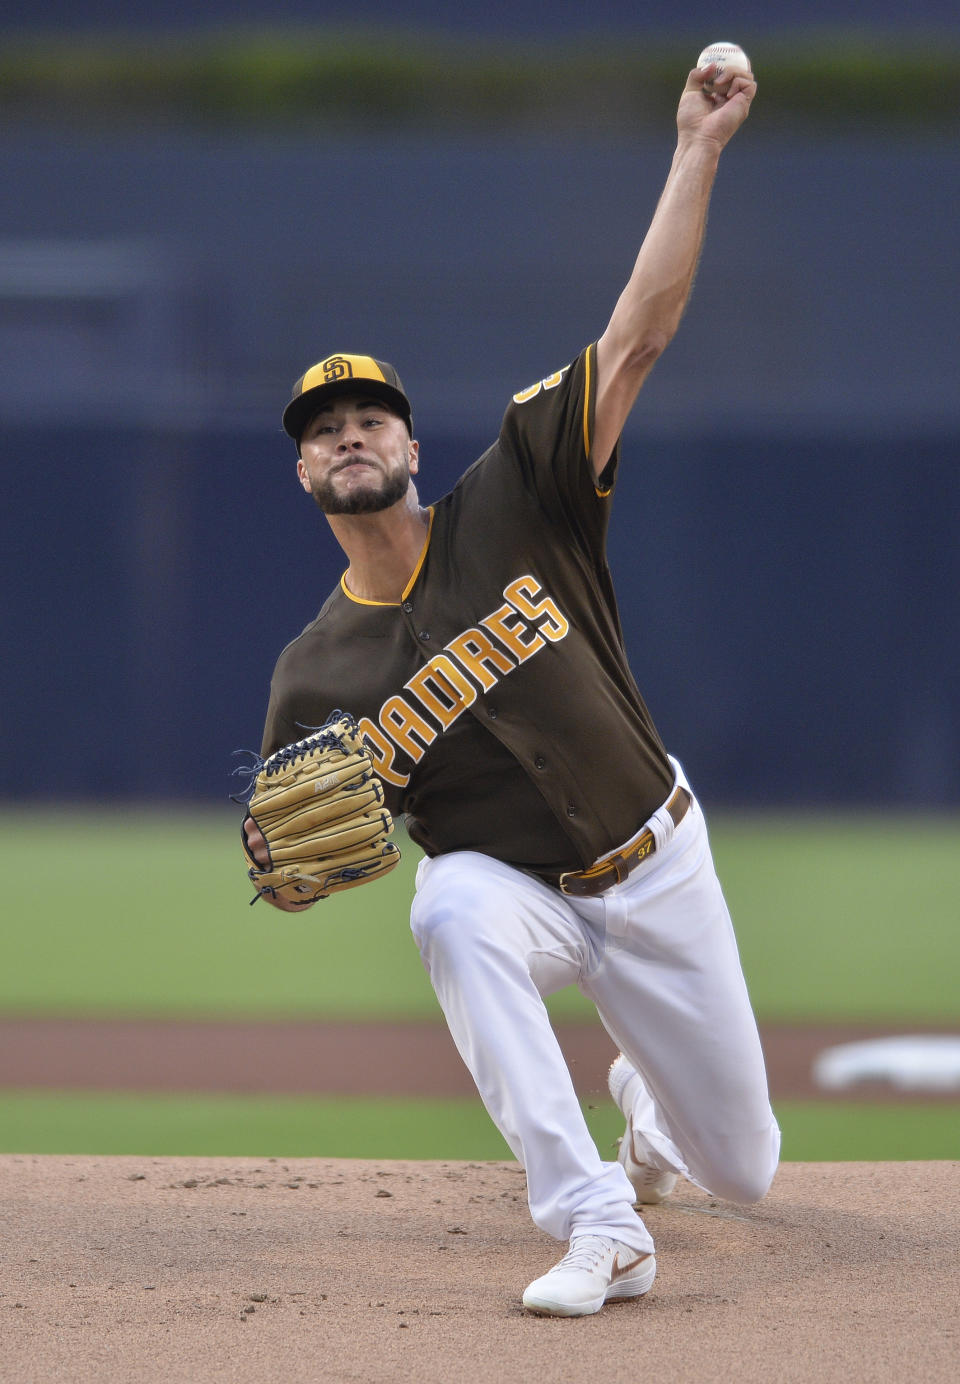 San Diego Padres starting pitcher Joey Lucchesi works against a San Francisco Giants batter during the first inning of a baseball game Friday, July 26, 2019, in San Diego. (AP Photo/Orlando Ramirez)